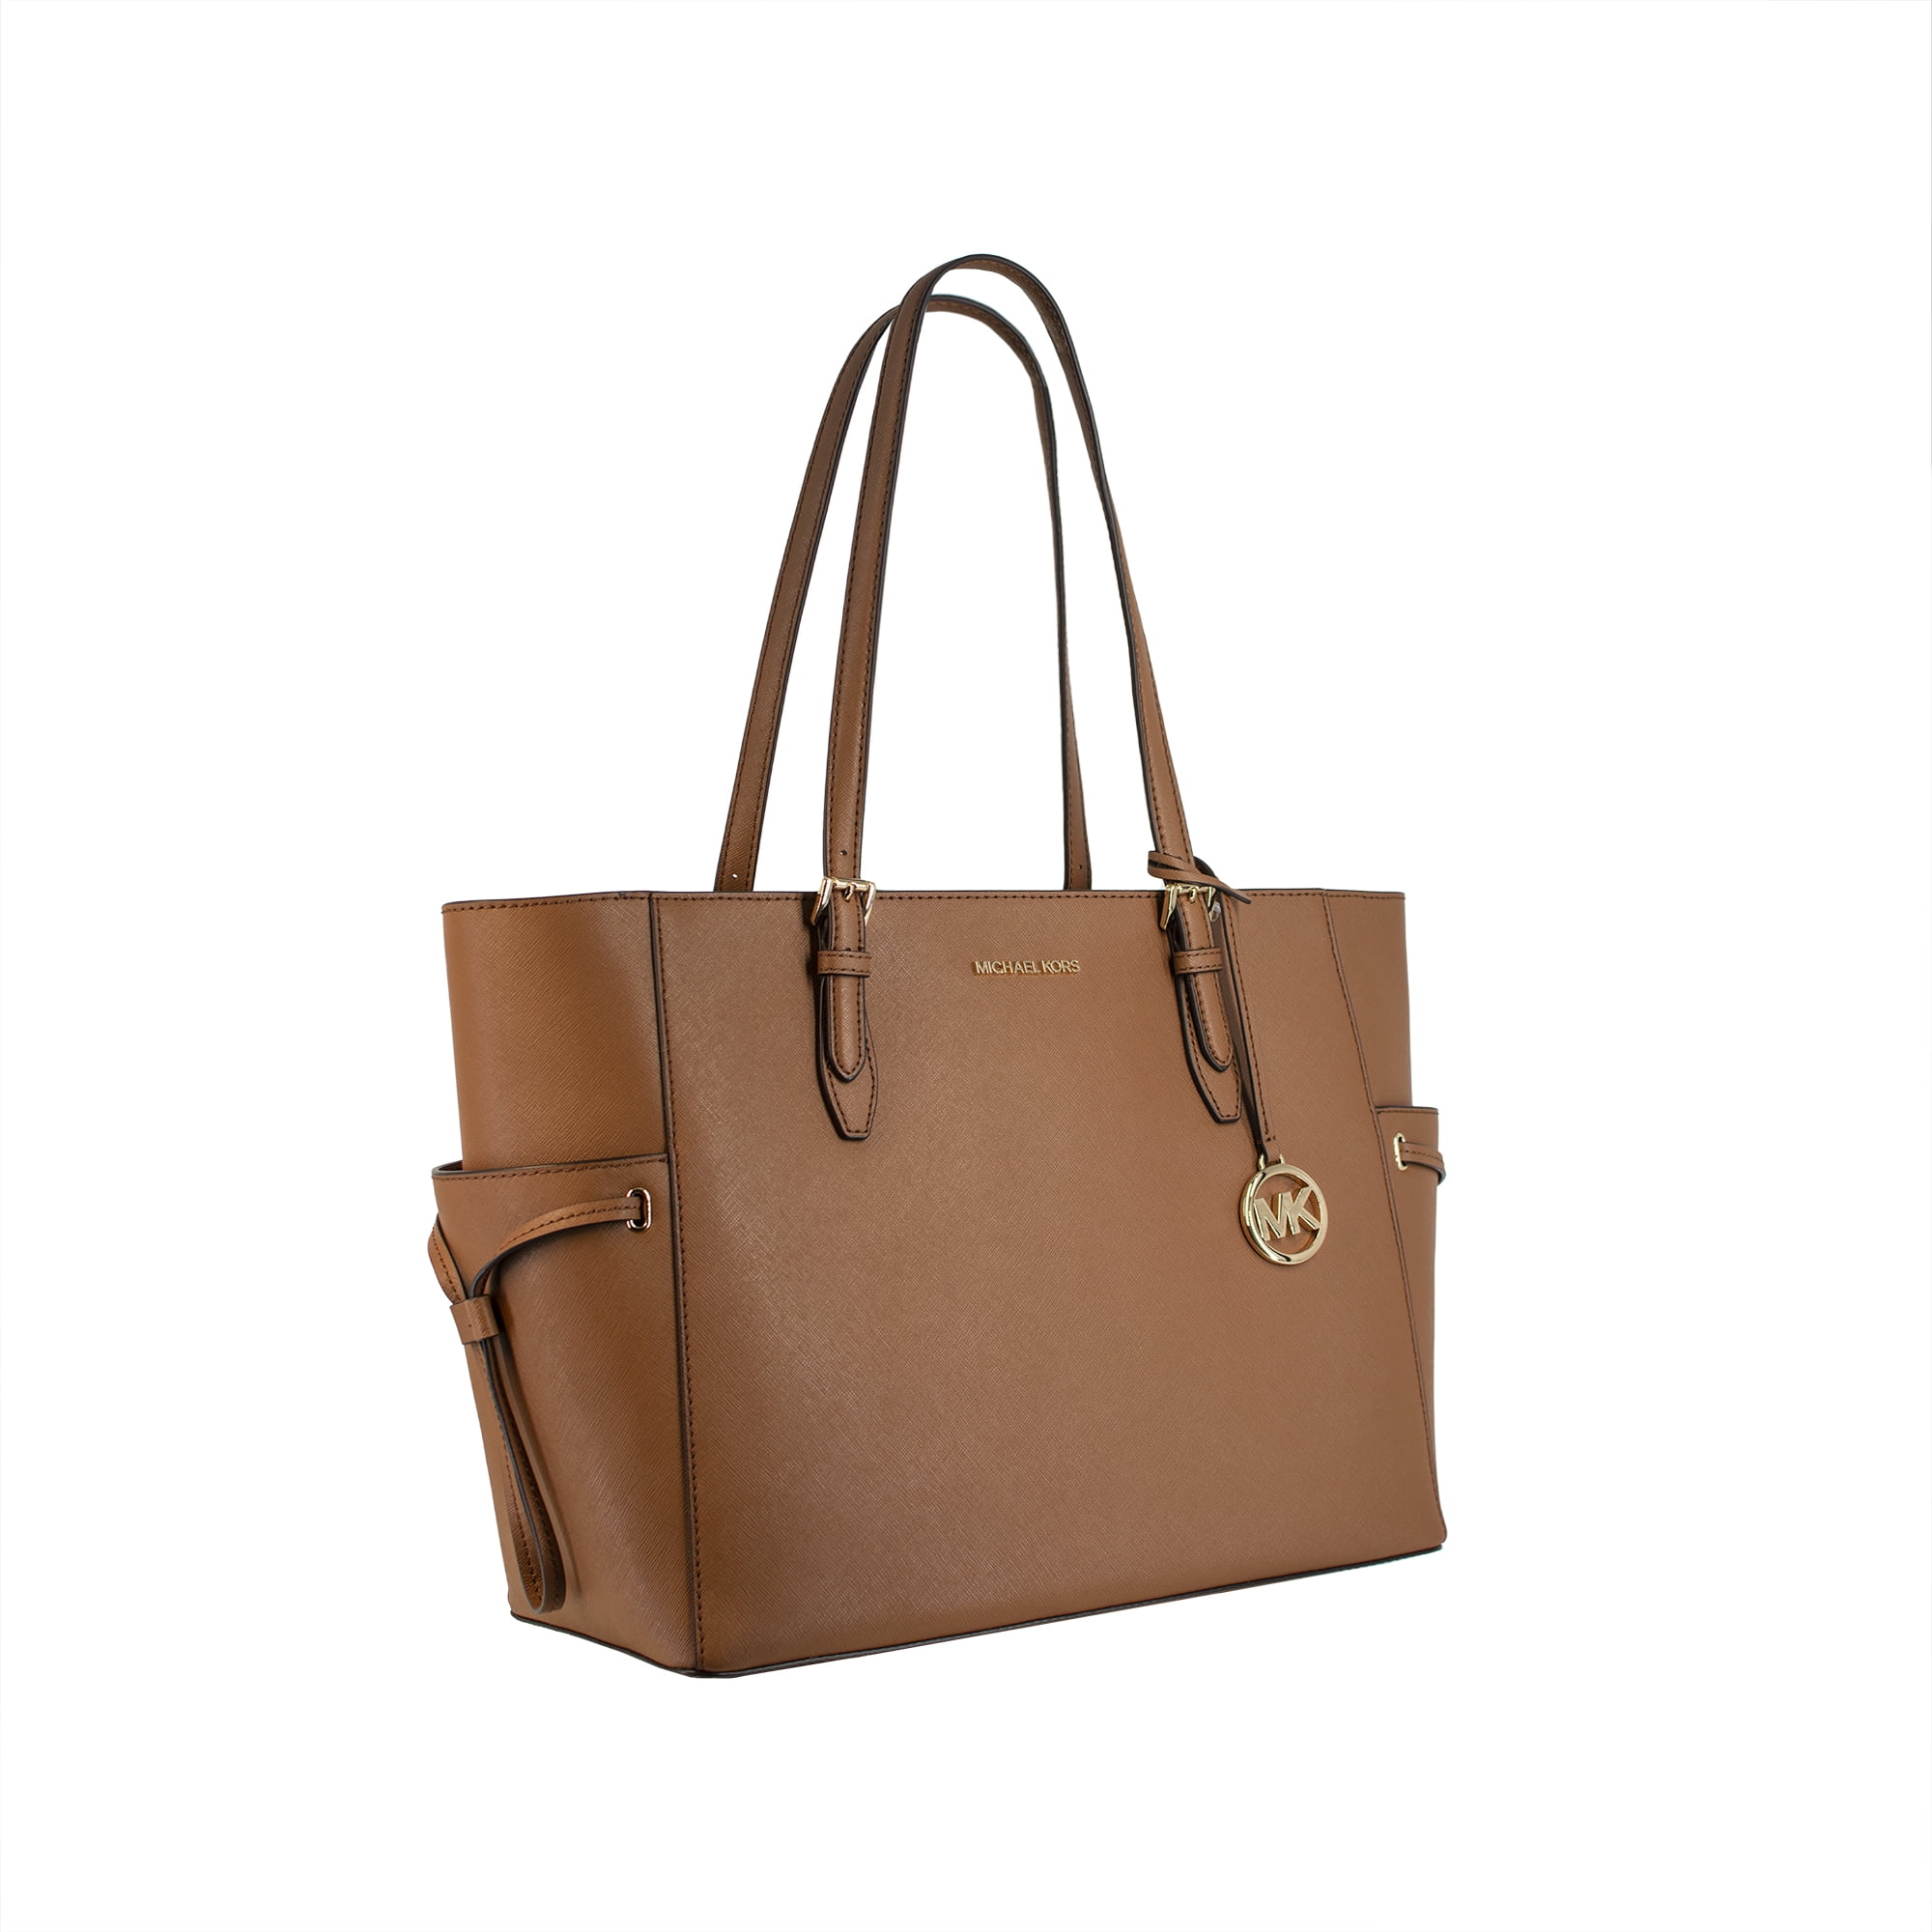 Michael Kors Bags | Michael Kors Large Gilly Tote Bag | Color: Brown/Gold | Size: Large | Rluckychance88's Closet